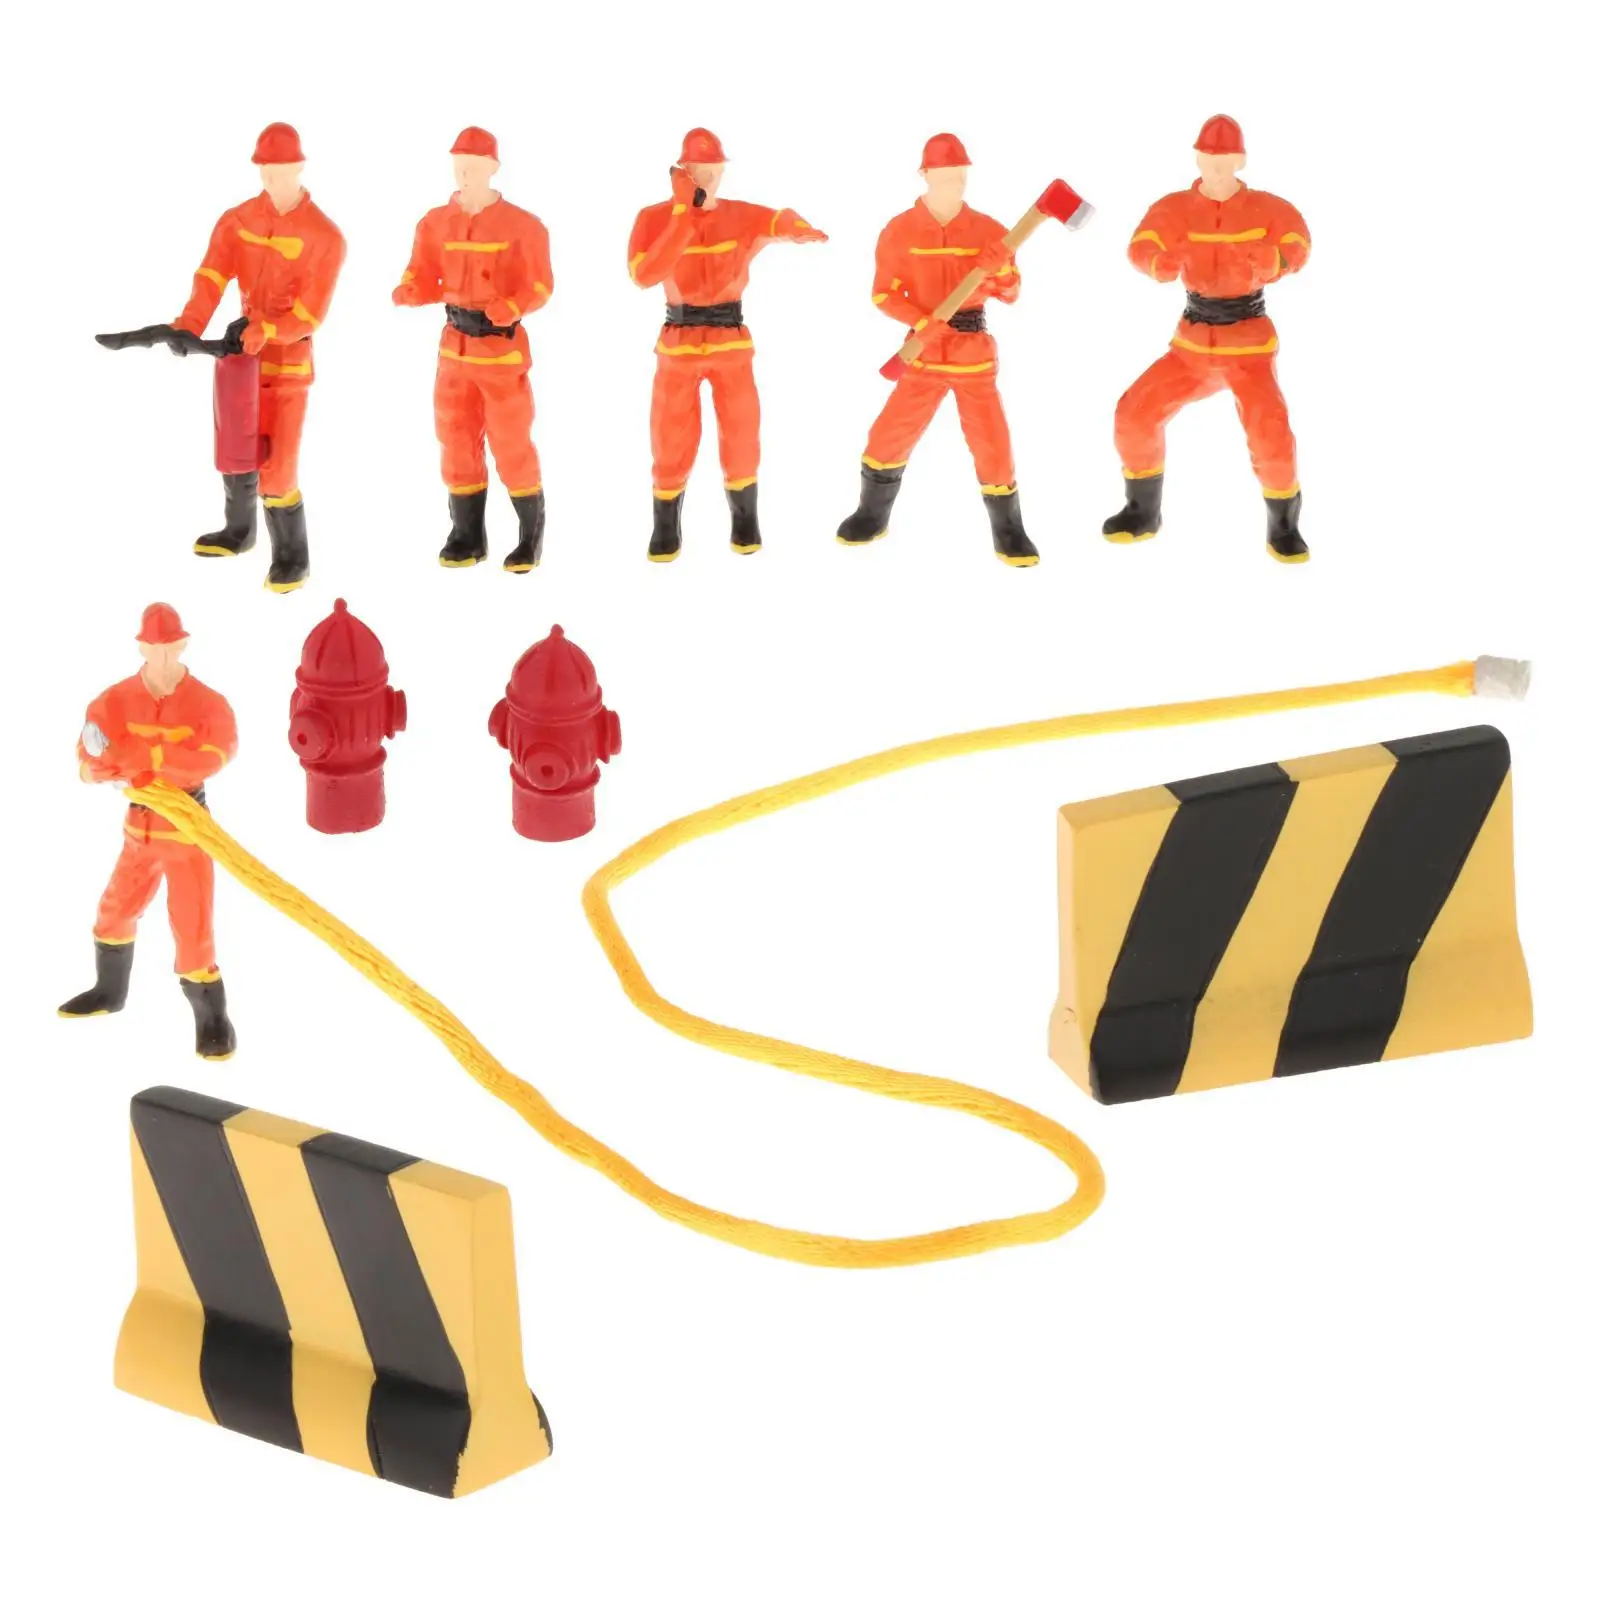 1:50 Scale Handpainted Dioramas Resin Firefighter Model for Trains Scene Fairy Garden Dollhouse Model Accessories Architectural